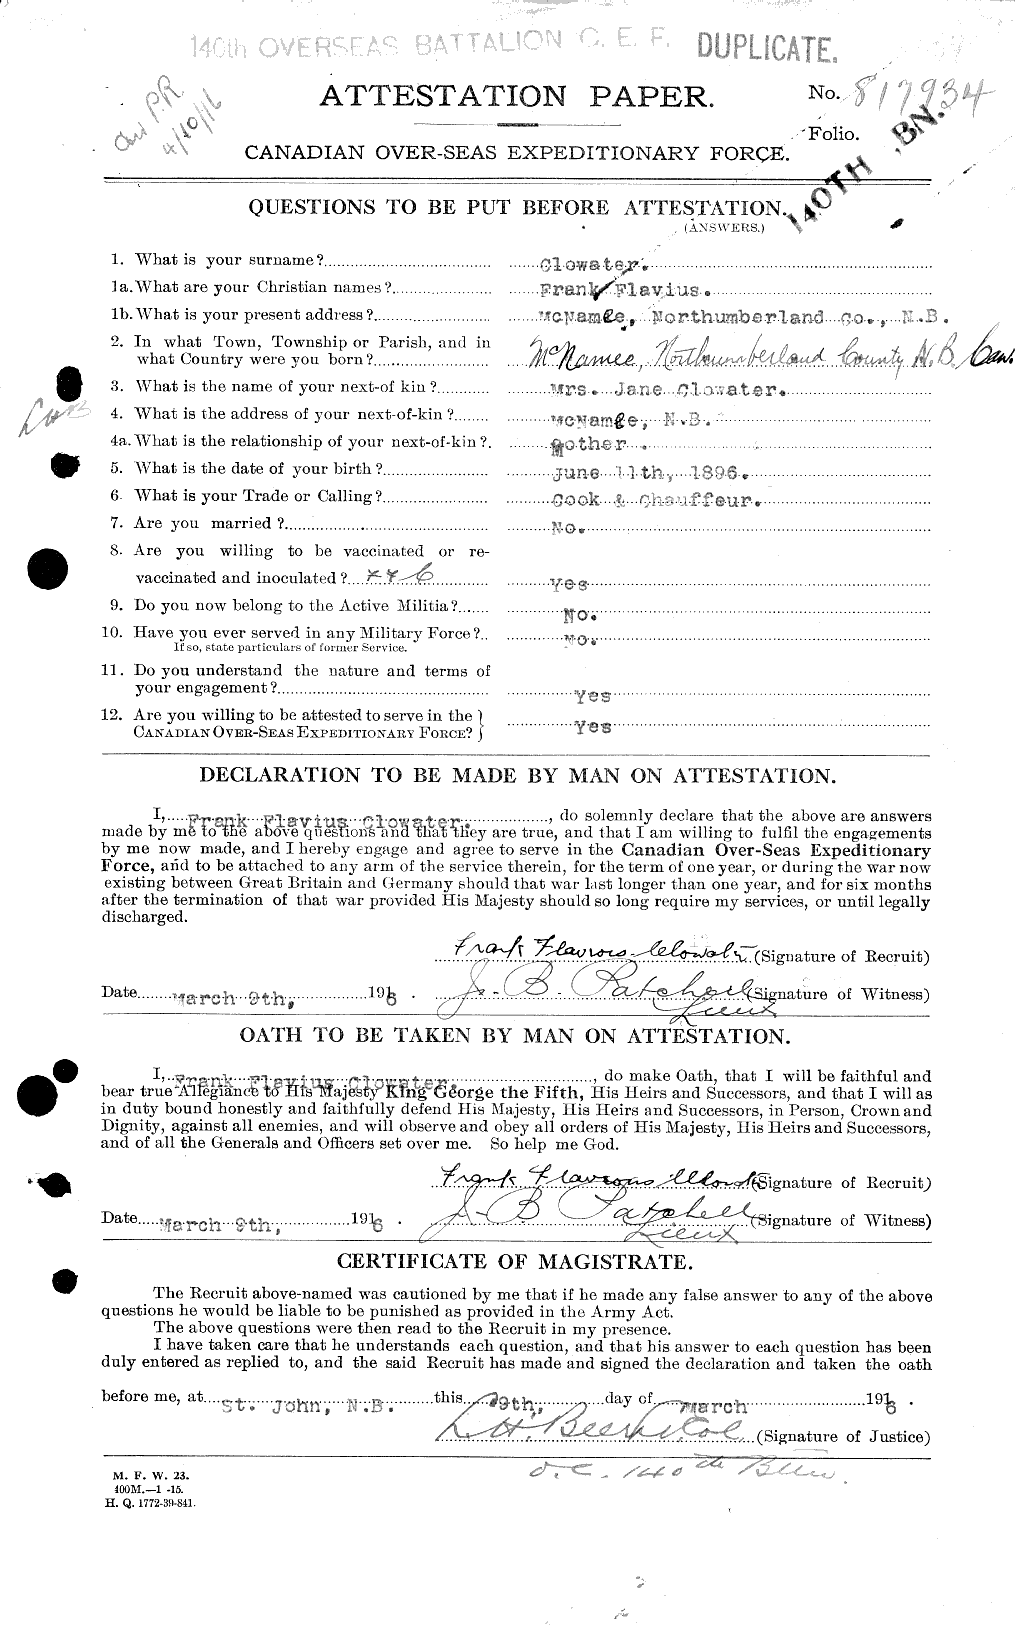 Personnel Records of the First World War - CEF 026240a